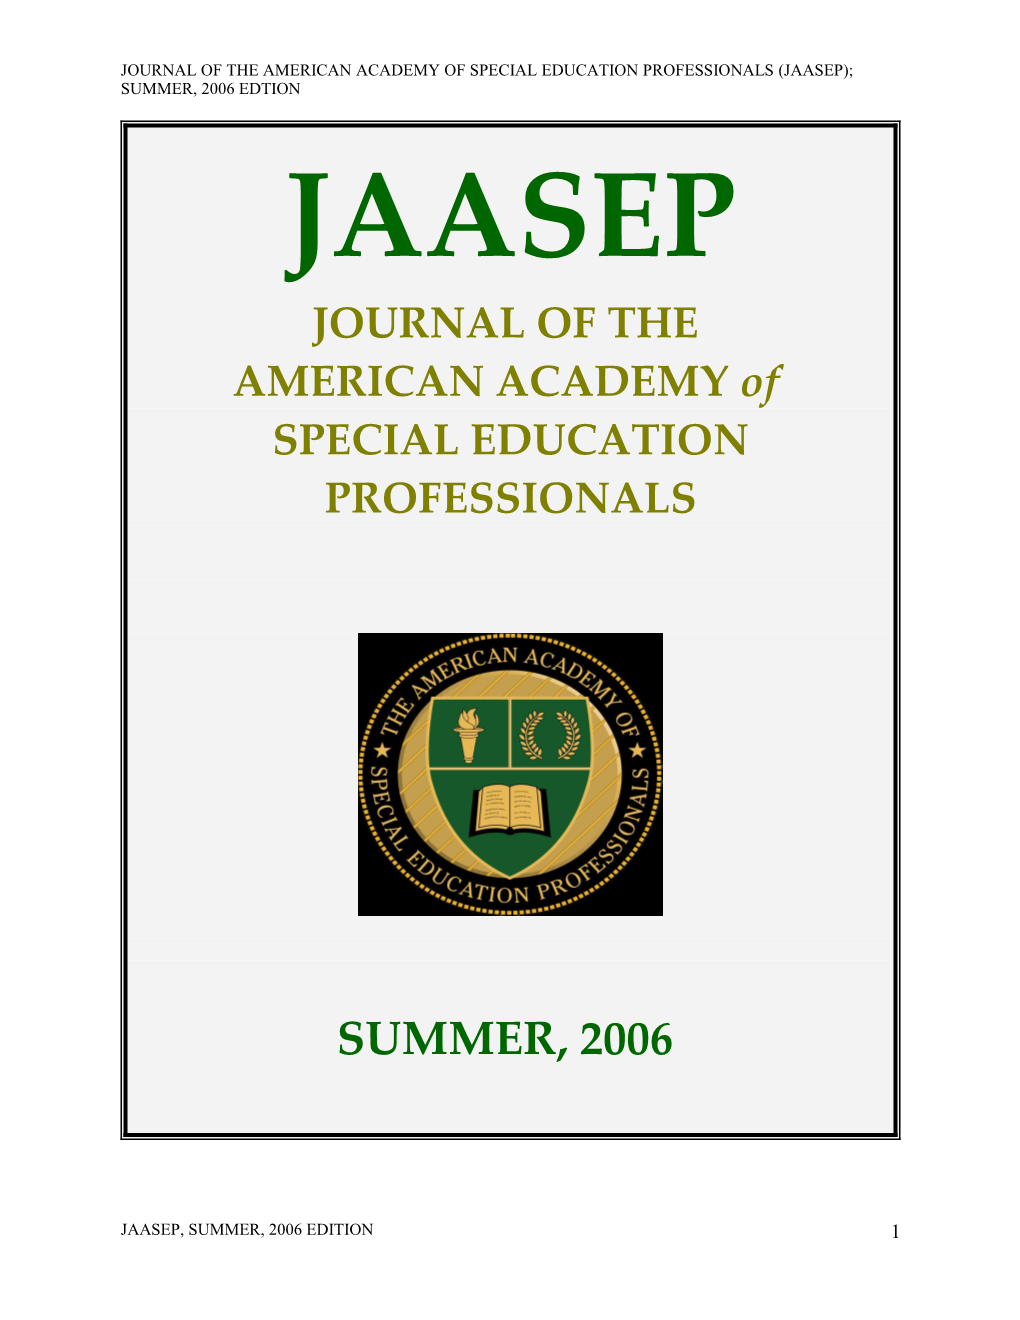 Journal of the Americanacademy of Special Education Professionals (Jaasep); Summer, 2006 Edtion